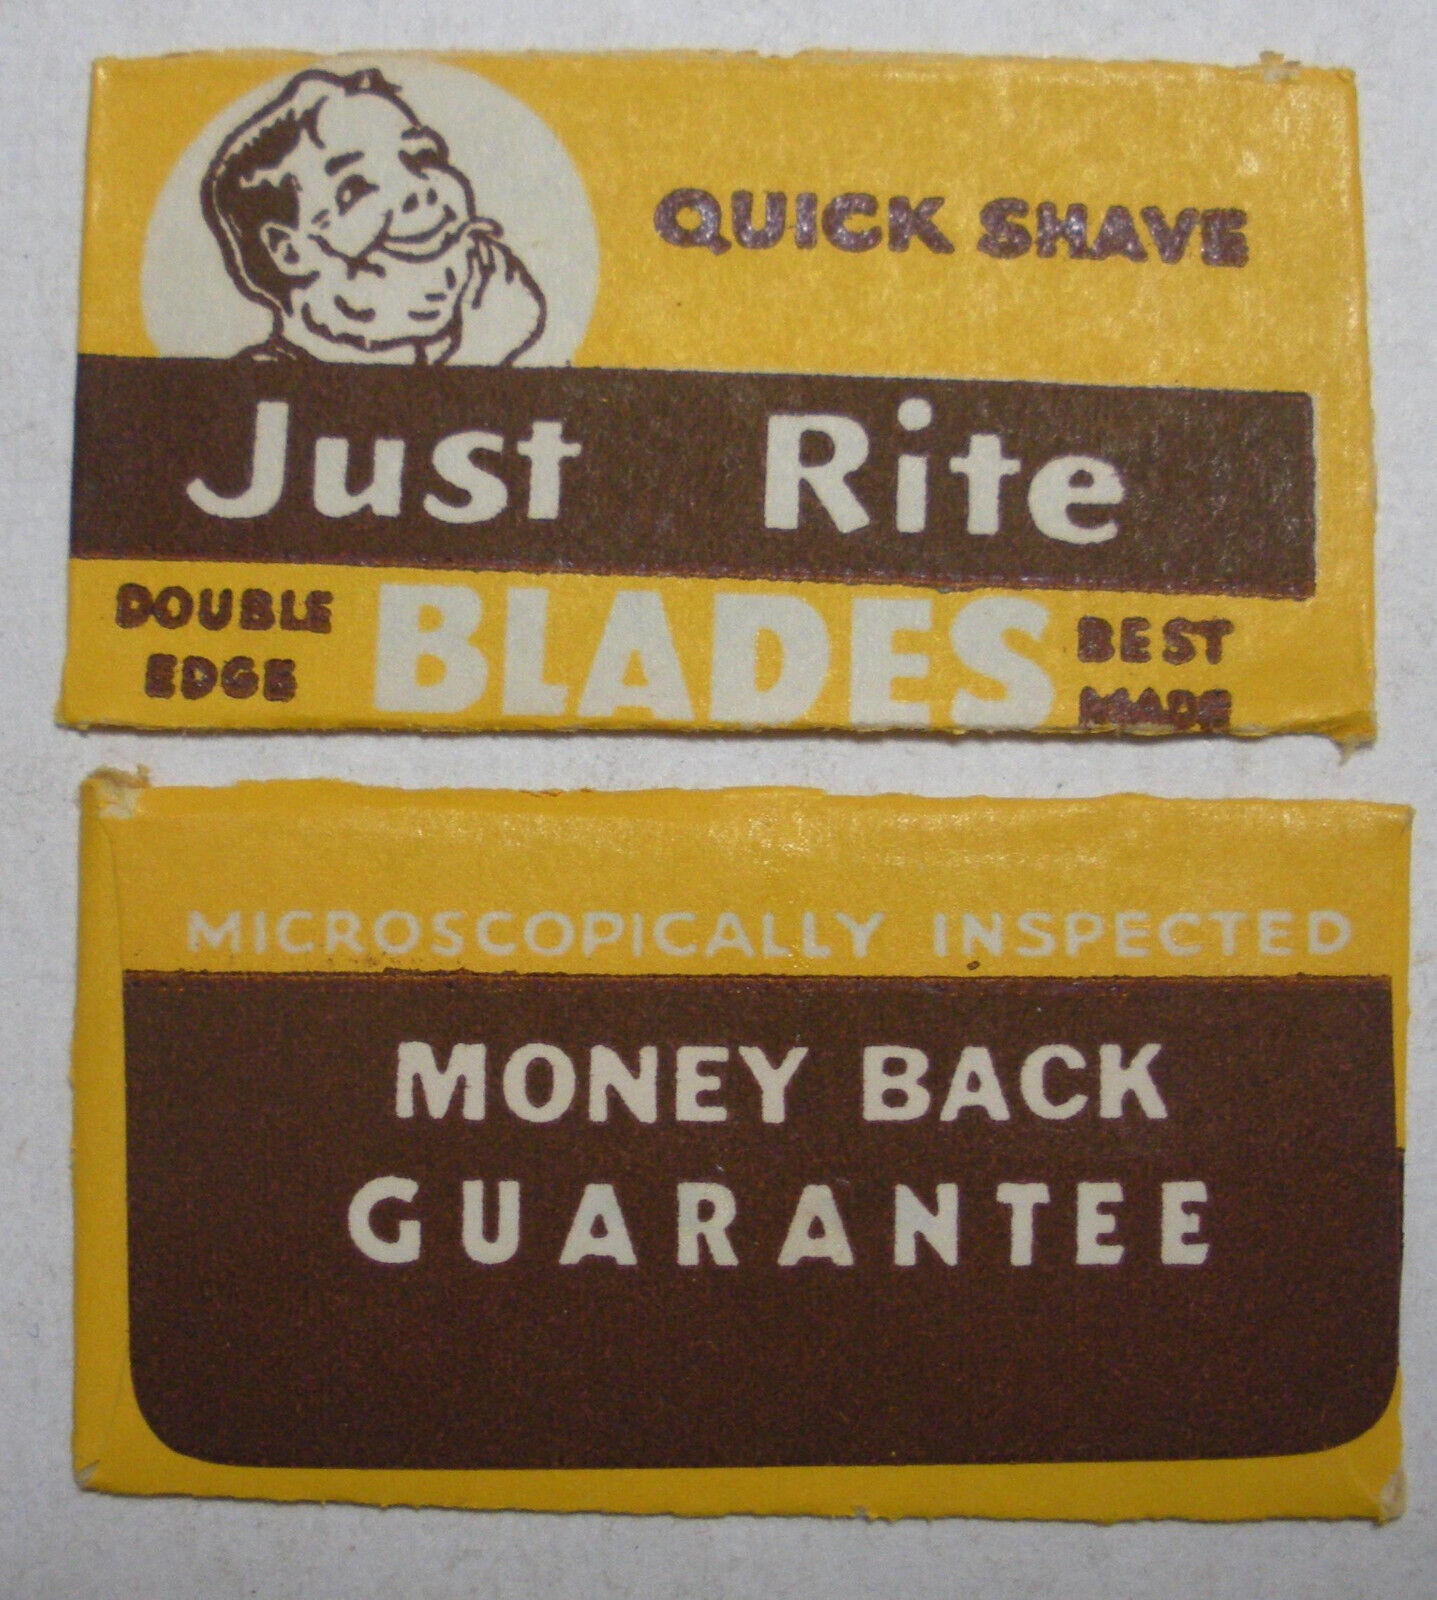 Vintage Razor Blade JUST RITE - One Wrapped Blade